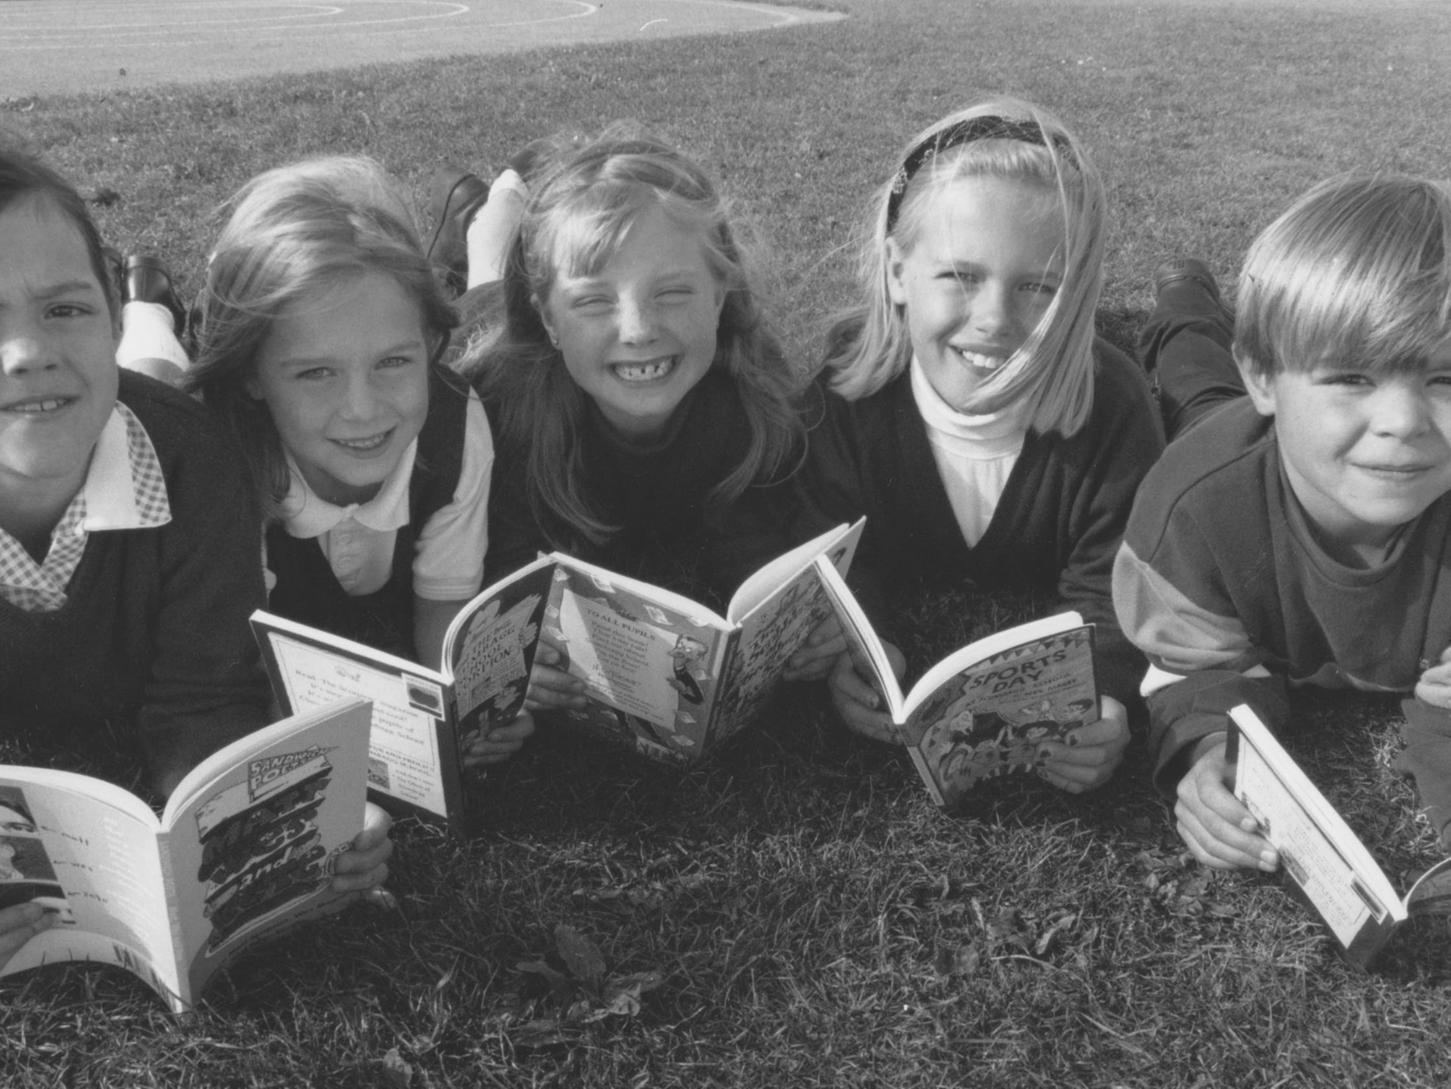 Author Wes Magee visited Hunmanby Primary School in October 1997 to hold workshops and to share his books with the children. Pictured reading some of his books are, left to right, Rebecca Milburn, Kelsey Harland, Elise Lemke, Lauren Rees and Richard Lowery.